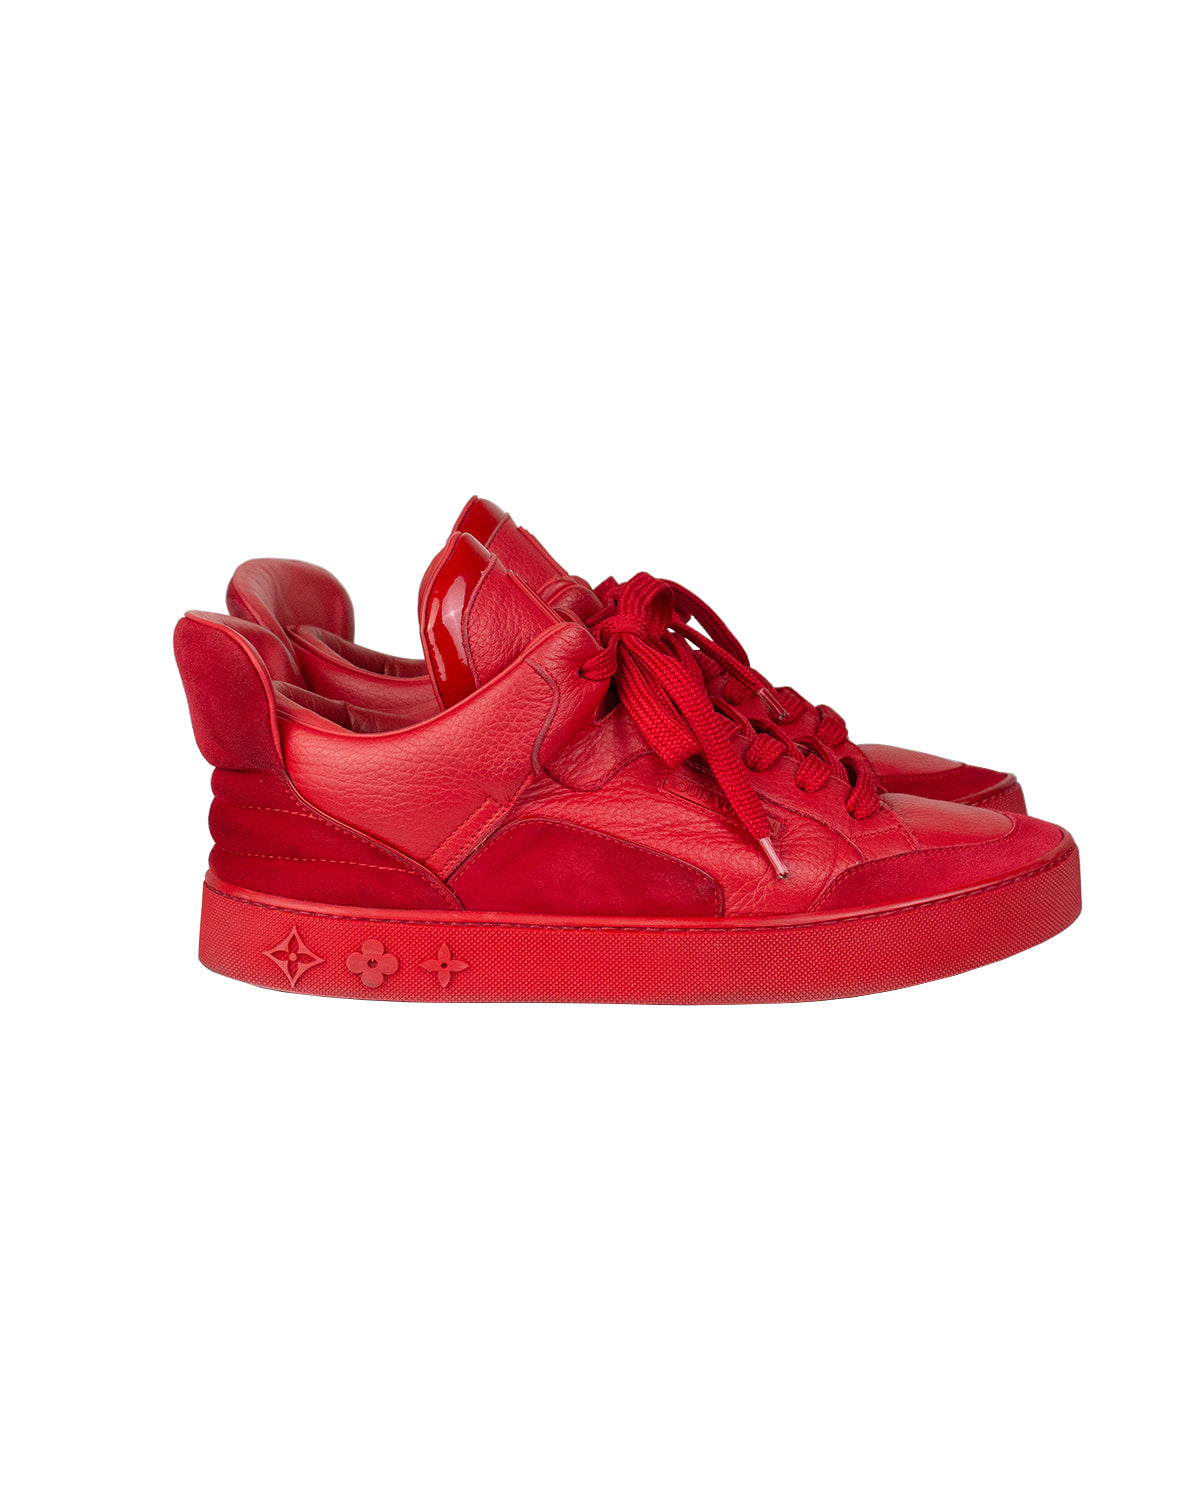 Louis Vuitton Kanye West Red Dons Size LV 6.5 